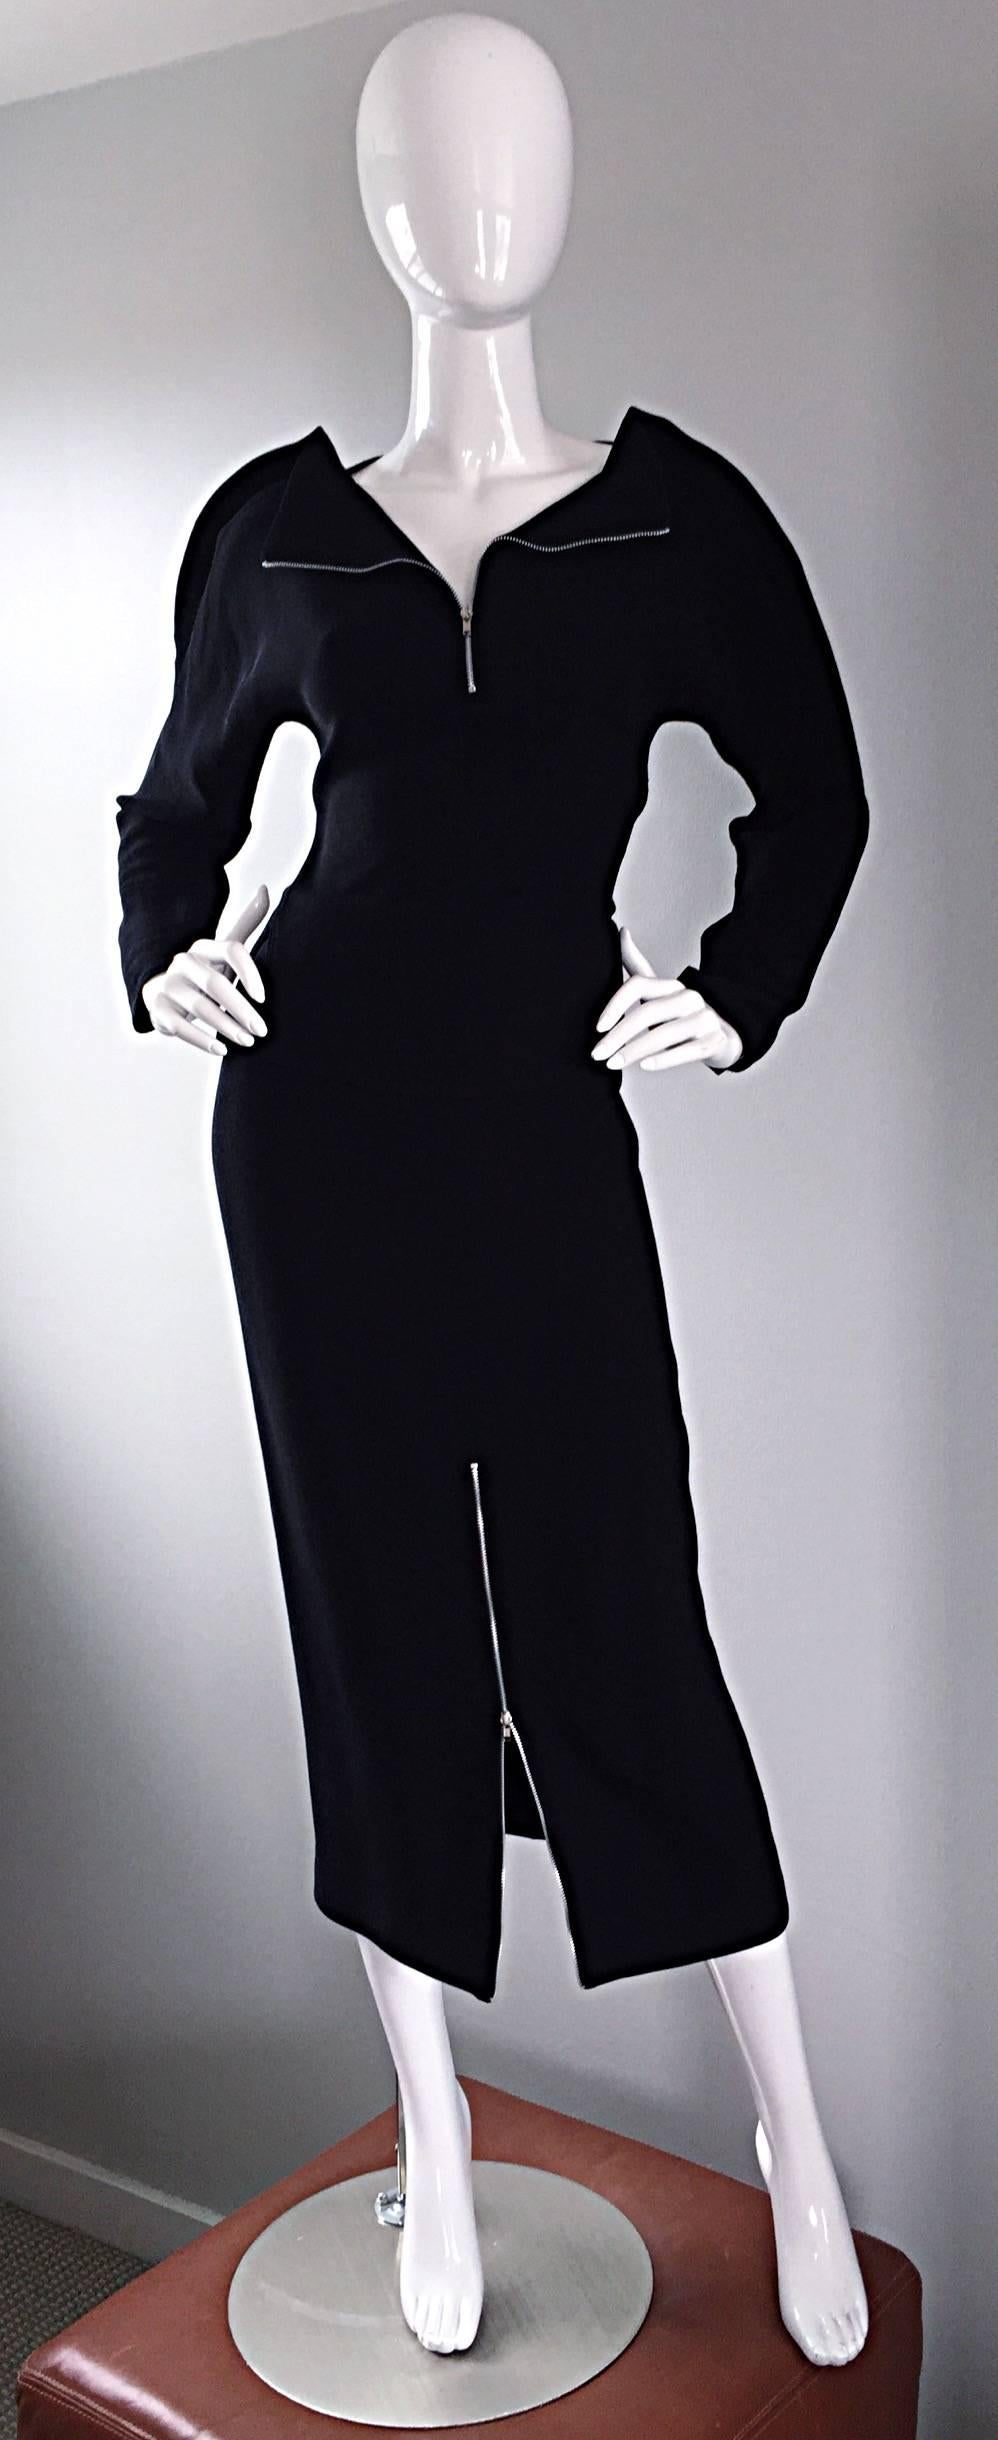 Important Rare Geoffrey Beene Minimalist Zipper Black Dress Set / Top & Skirt In Excellent Condition For Sale In San Diego, CA